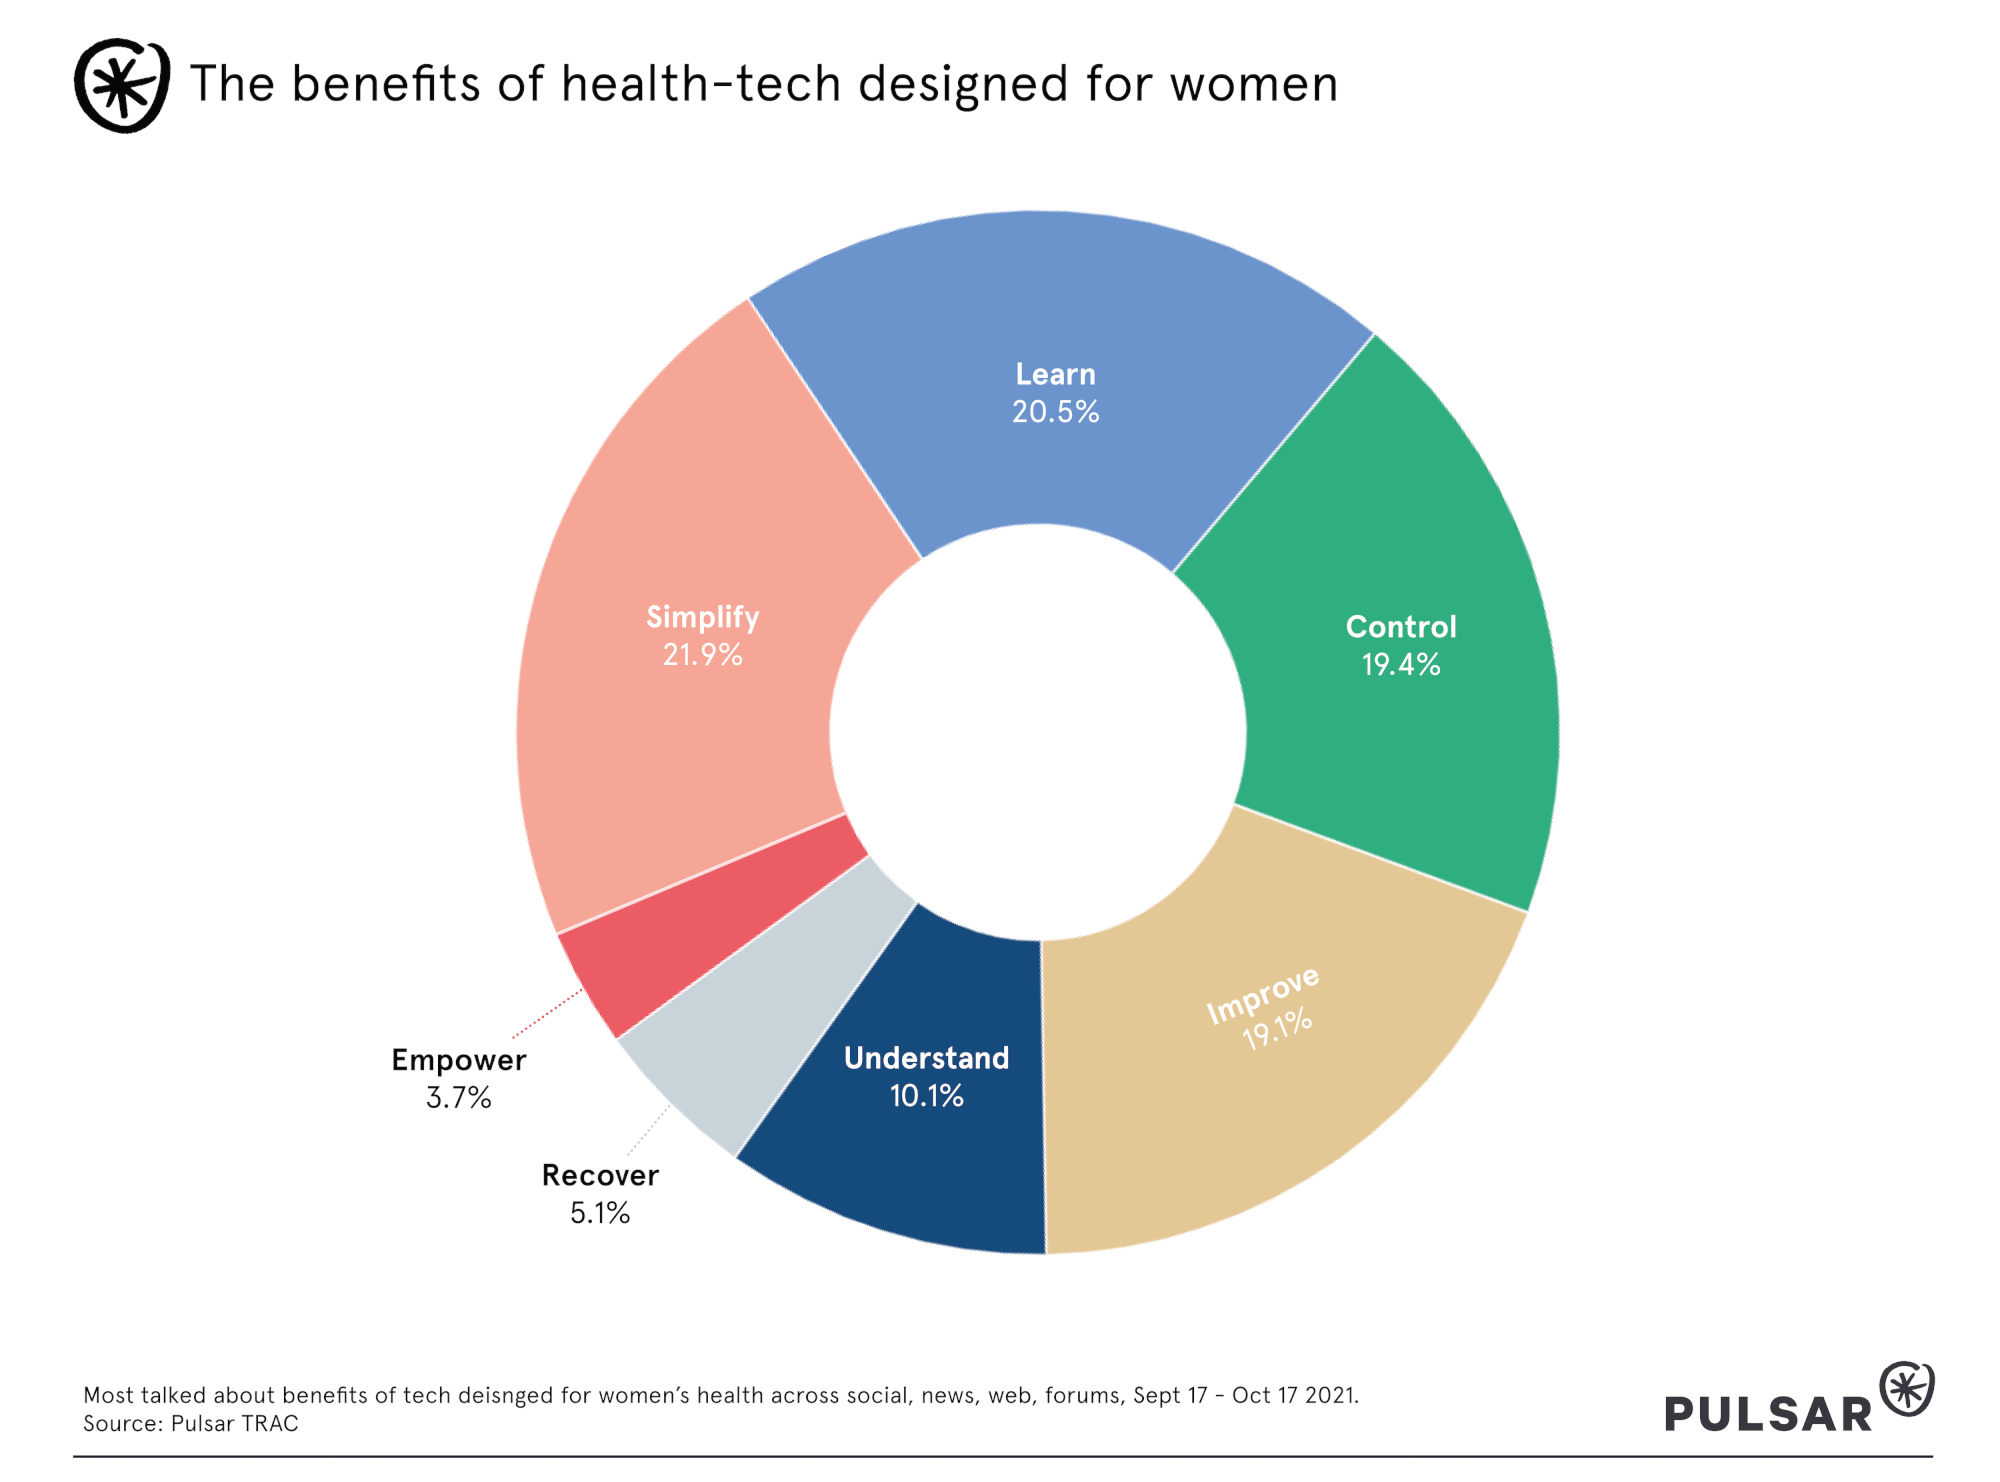 The benefits of health-tech designed for women